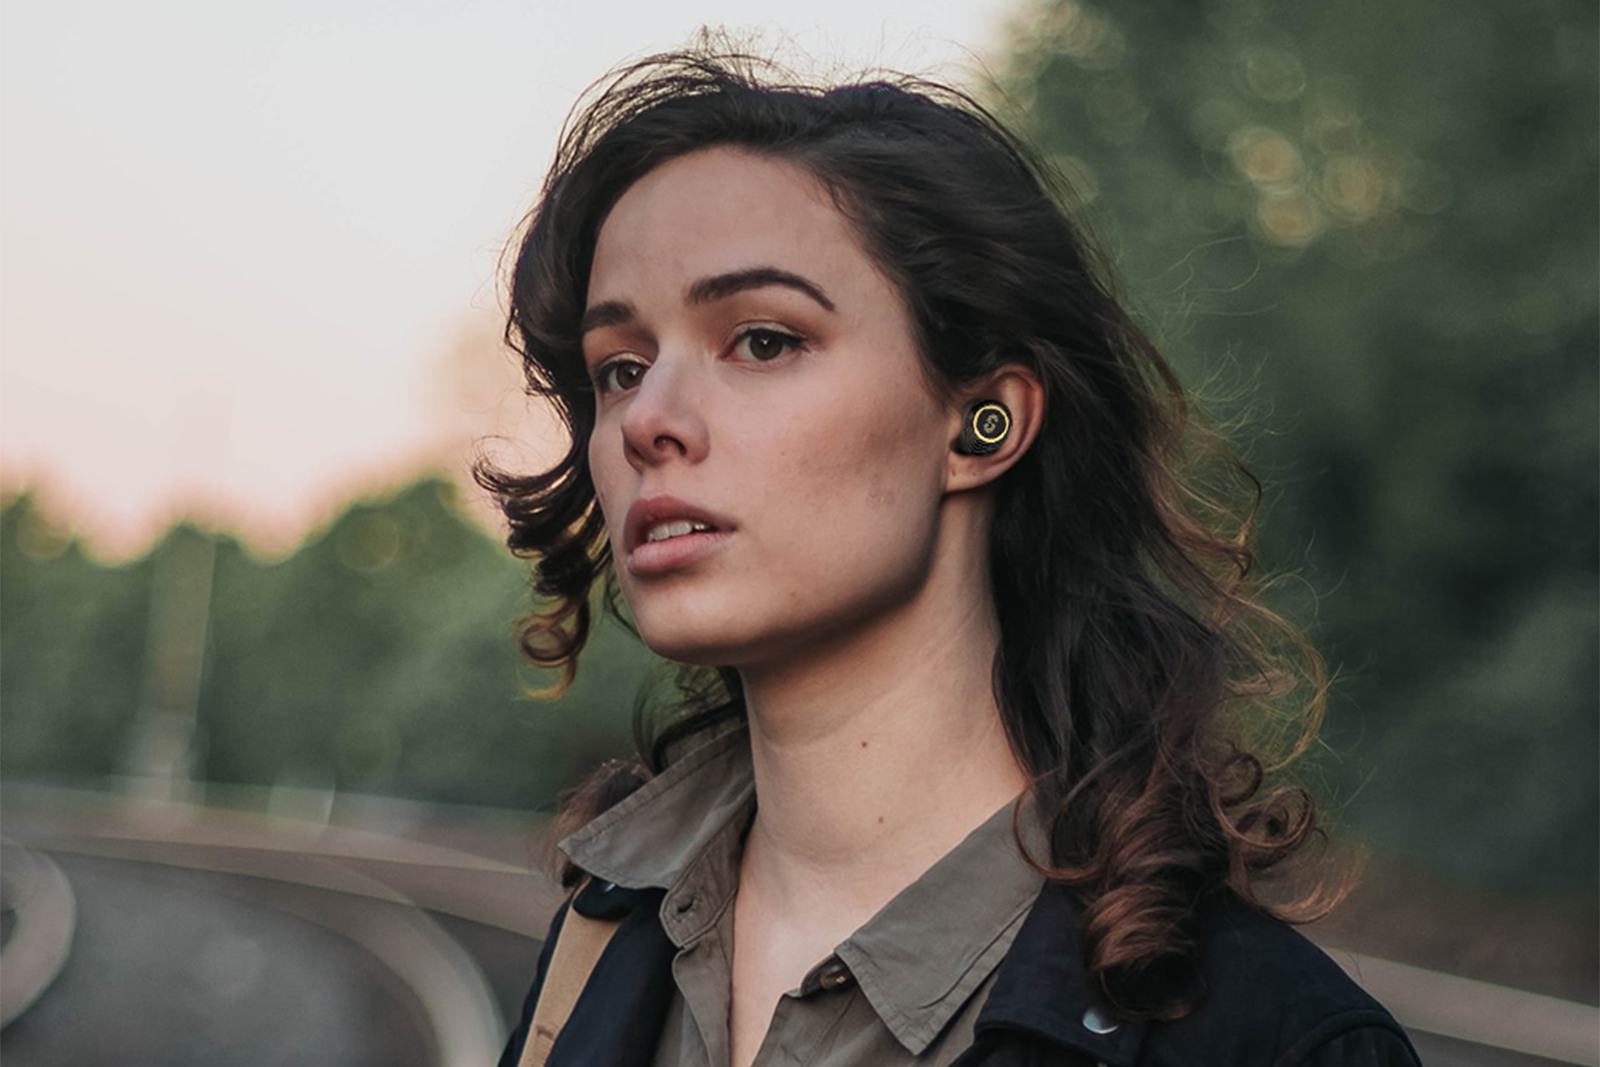 Super EQ offers up to 50% off on Bluetooth earbuds and headphones for Black Friday photo 6